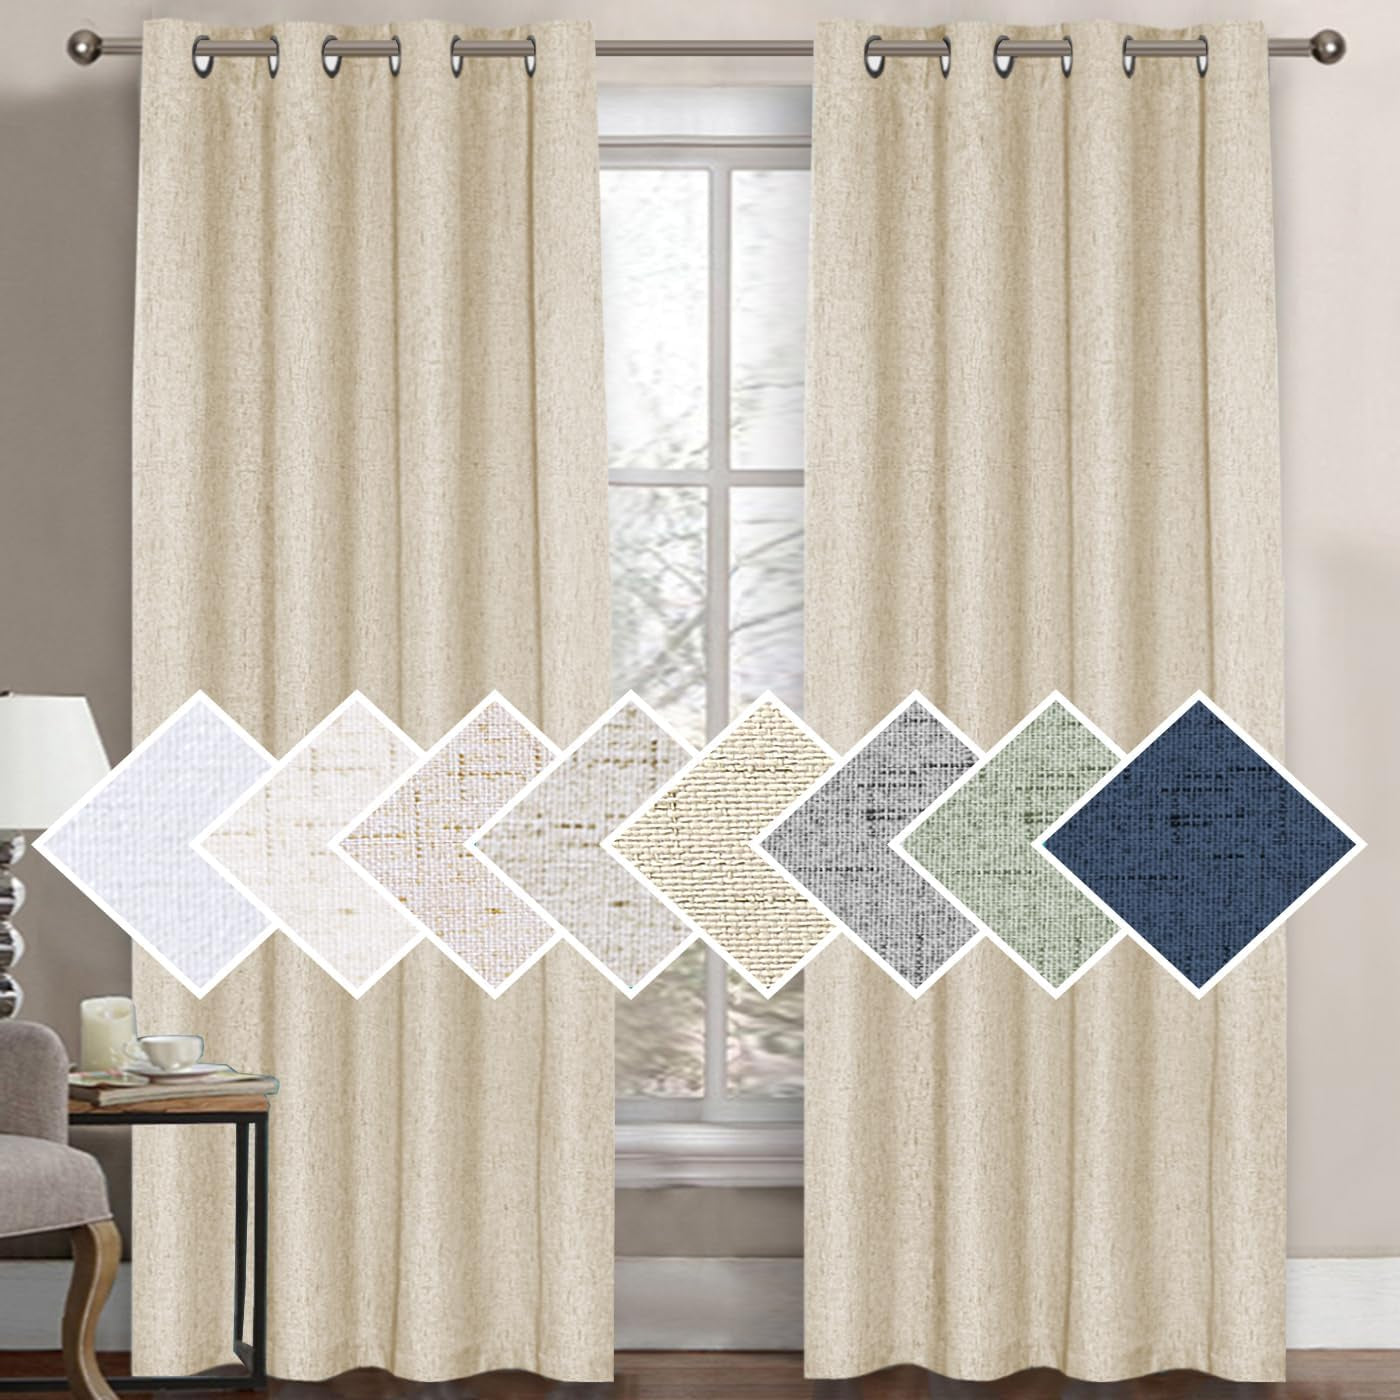 H.VERSAILTEX 100% Blackout Curtains for Bedroom Thermal Insulated Linen Textured Curtains Heat and Full Light Blocking Drapes Living Room Curtains 2 Panel Sets, 52X84 - Inch, Natural  H.VERSAILTEX Bleached Sand 1 Panel - 52"W X 96"L 